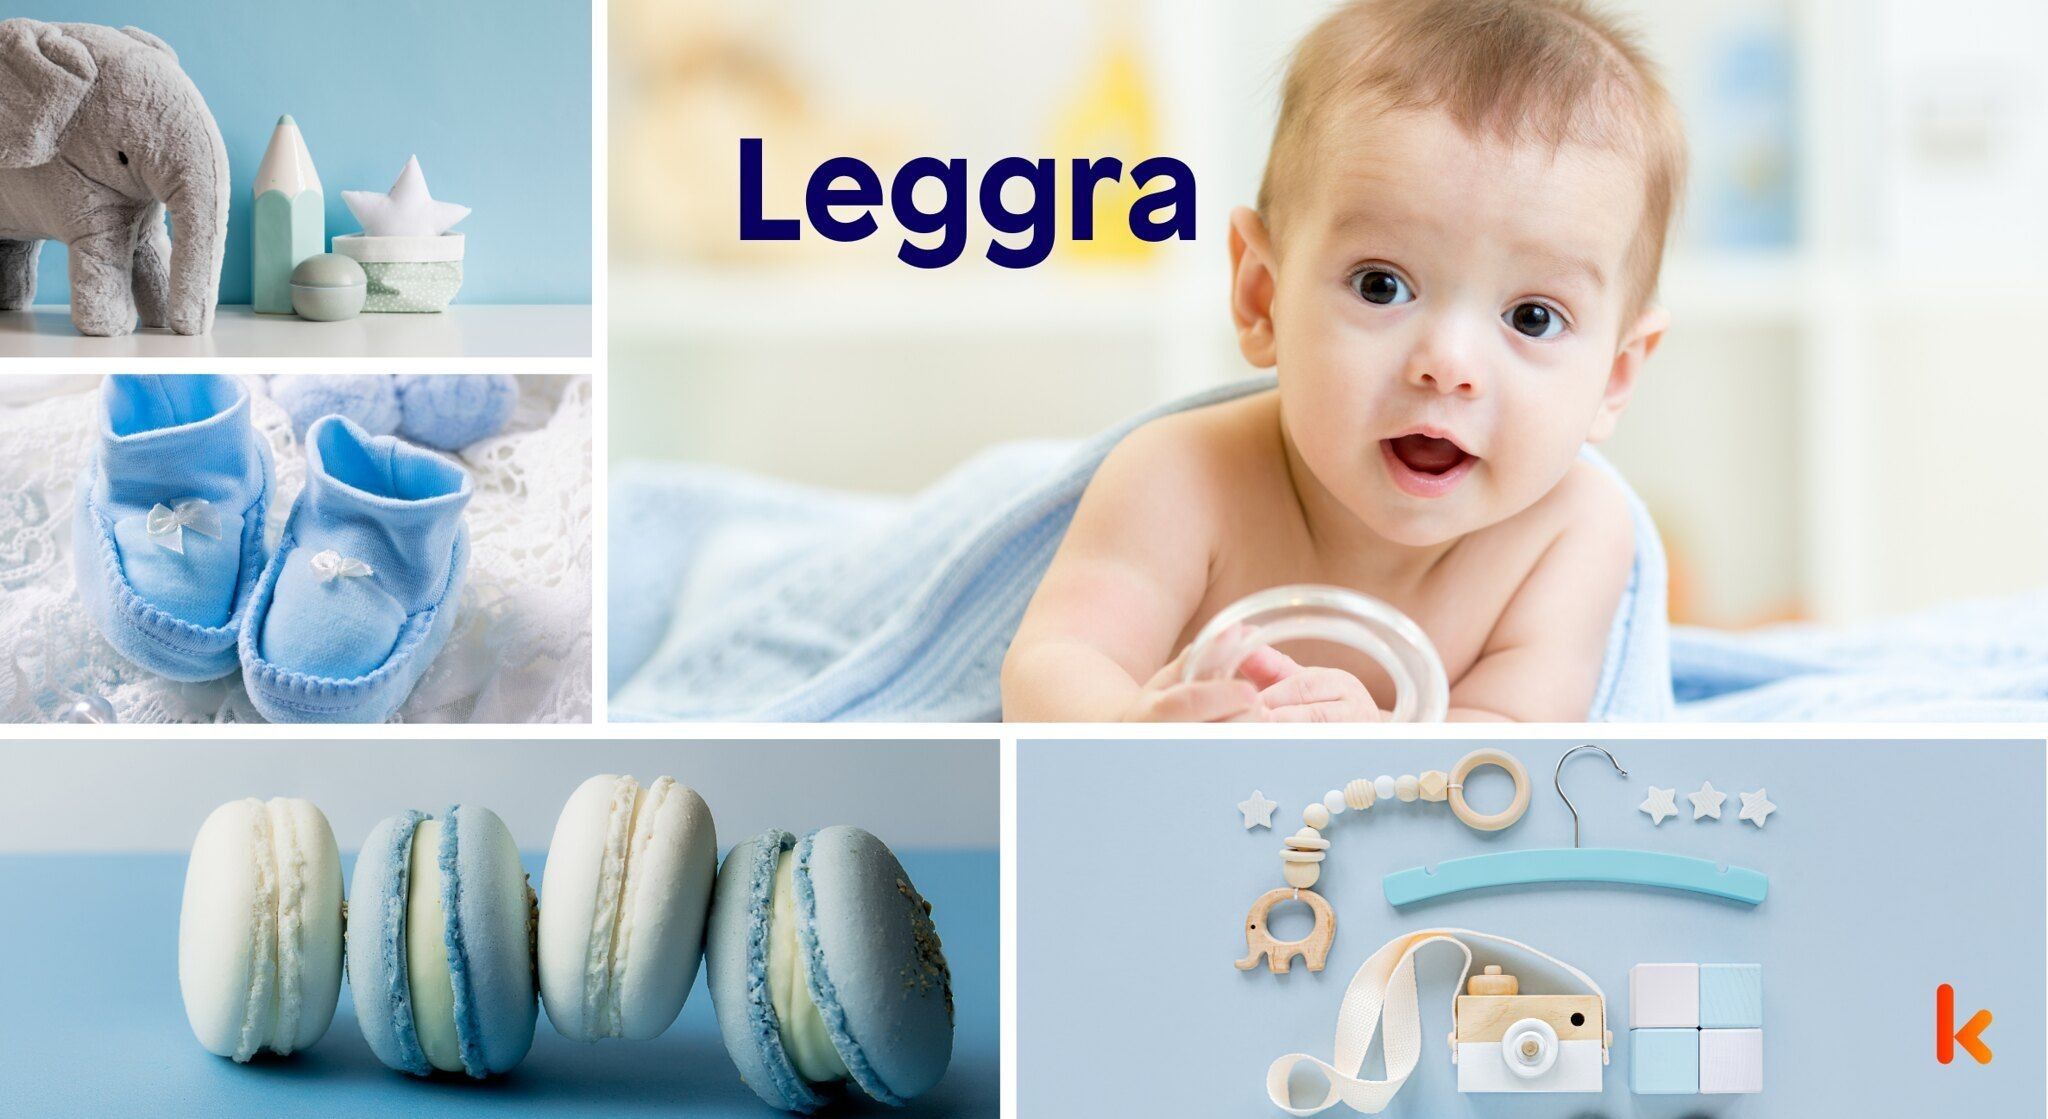 Meaning of the name Leggra